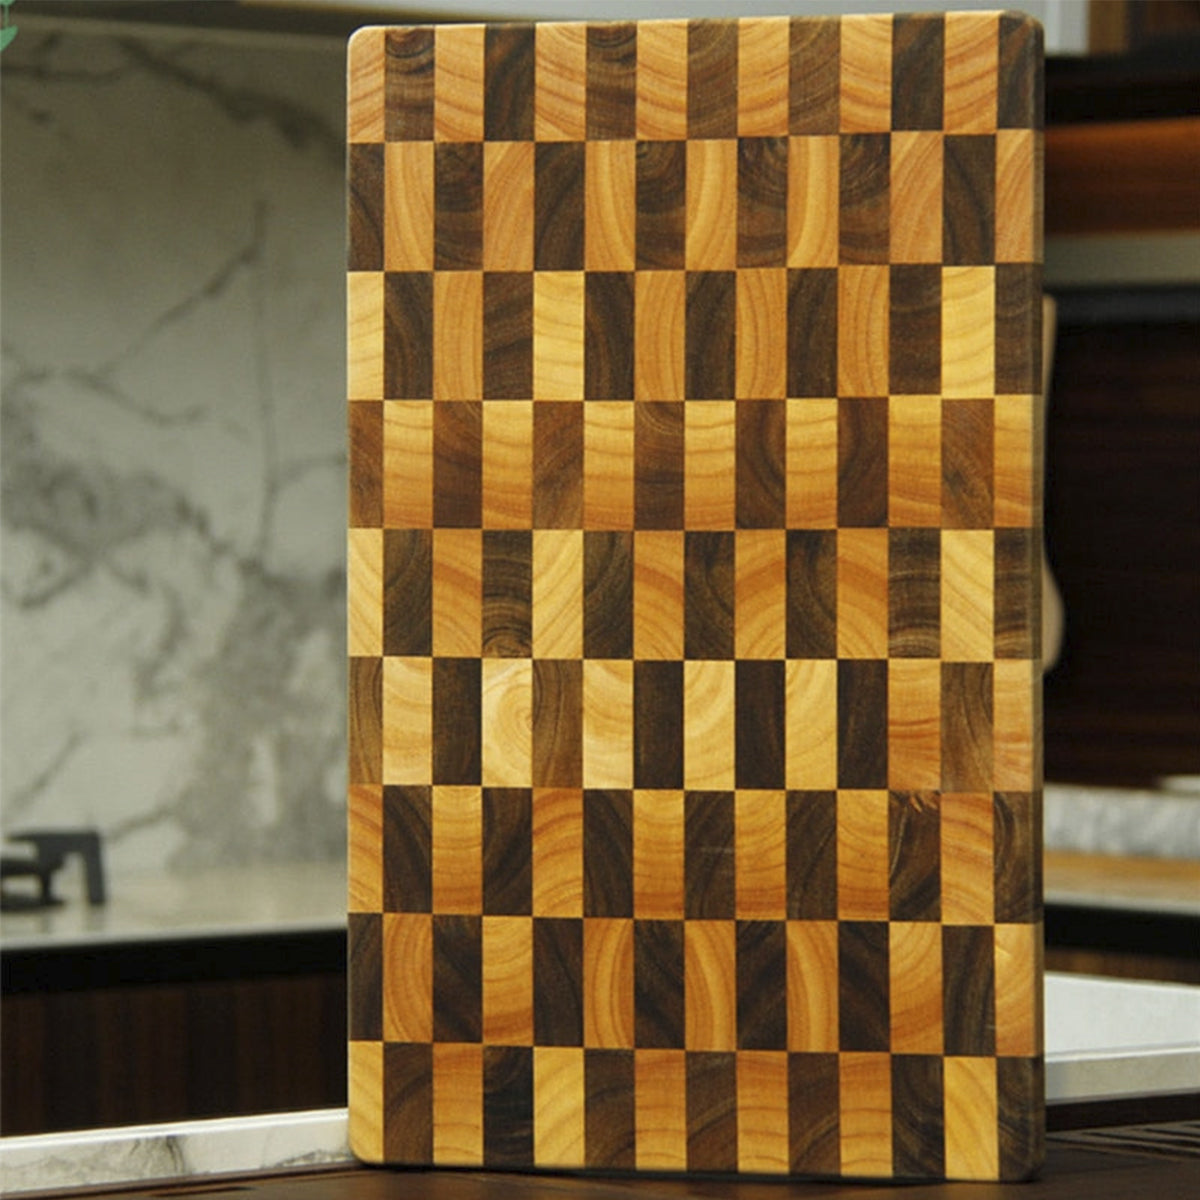 Two Wood Types Cutting Board